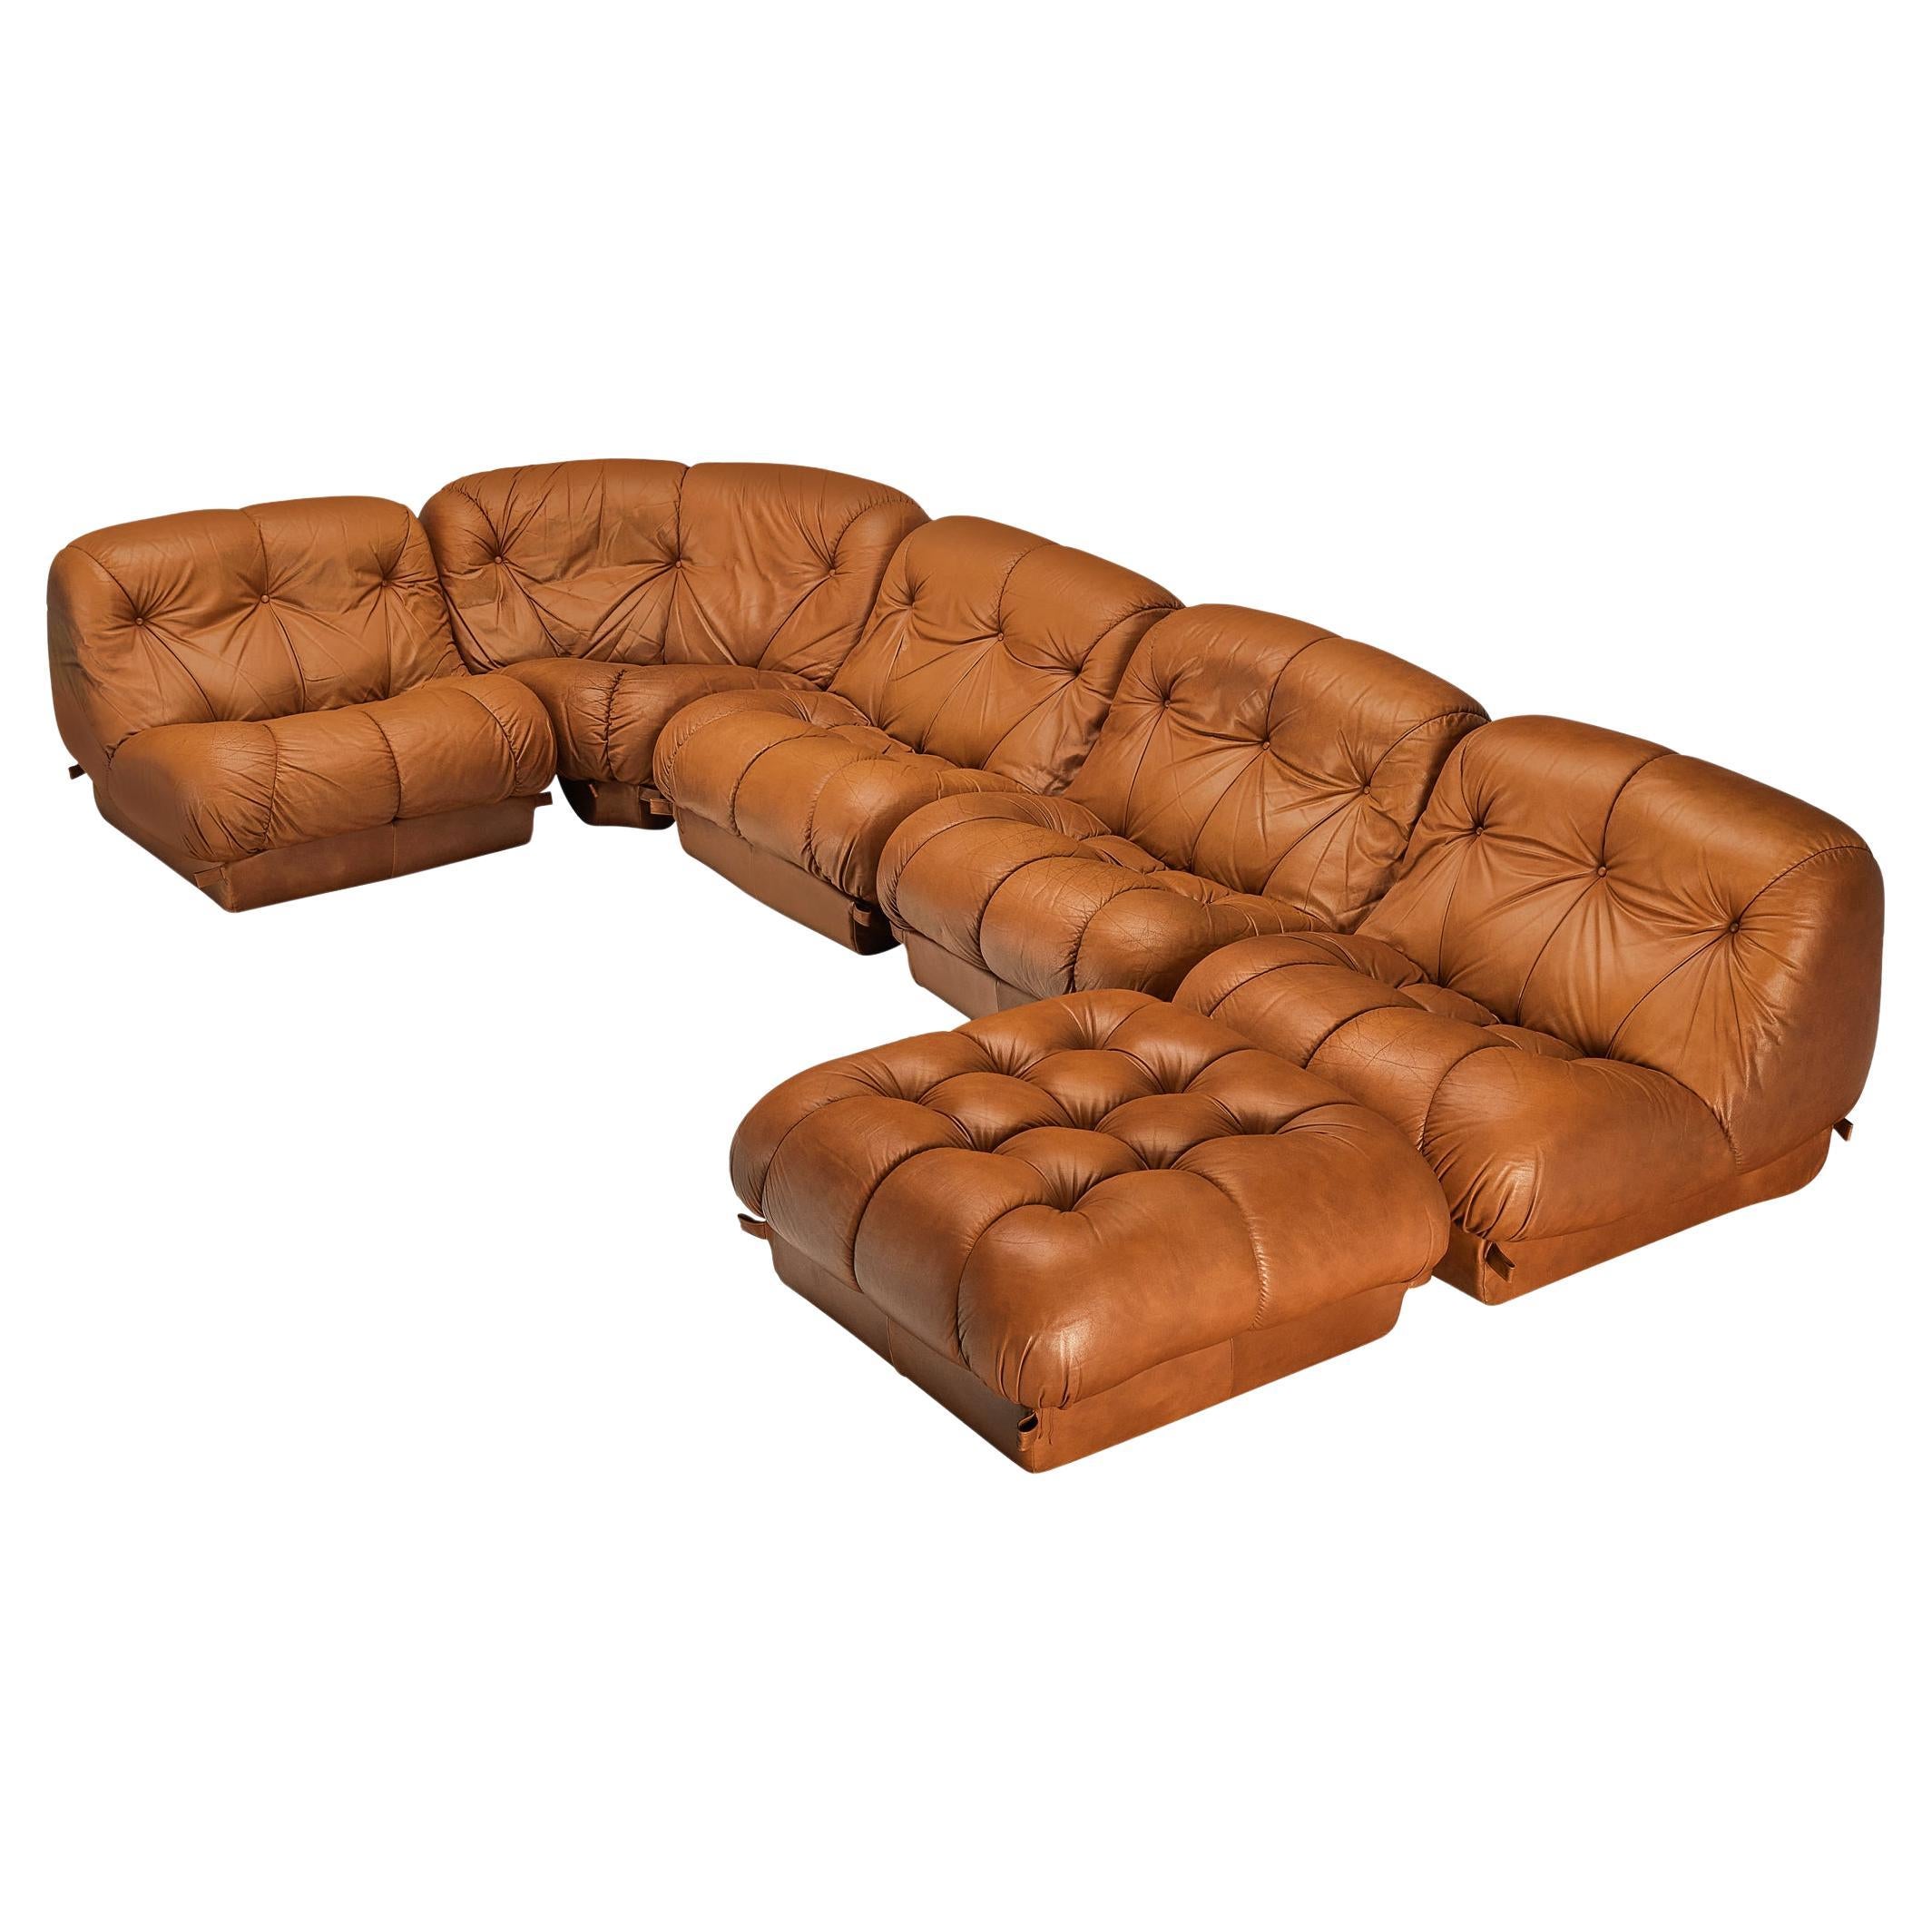 How can you tell if a sofa is real leather?